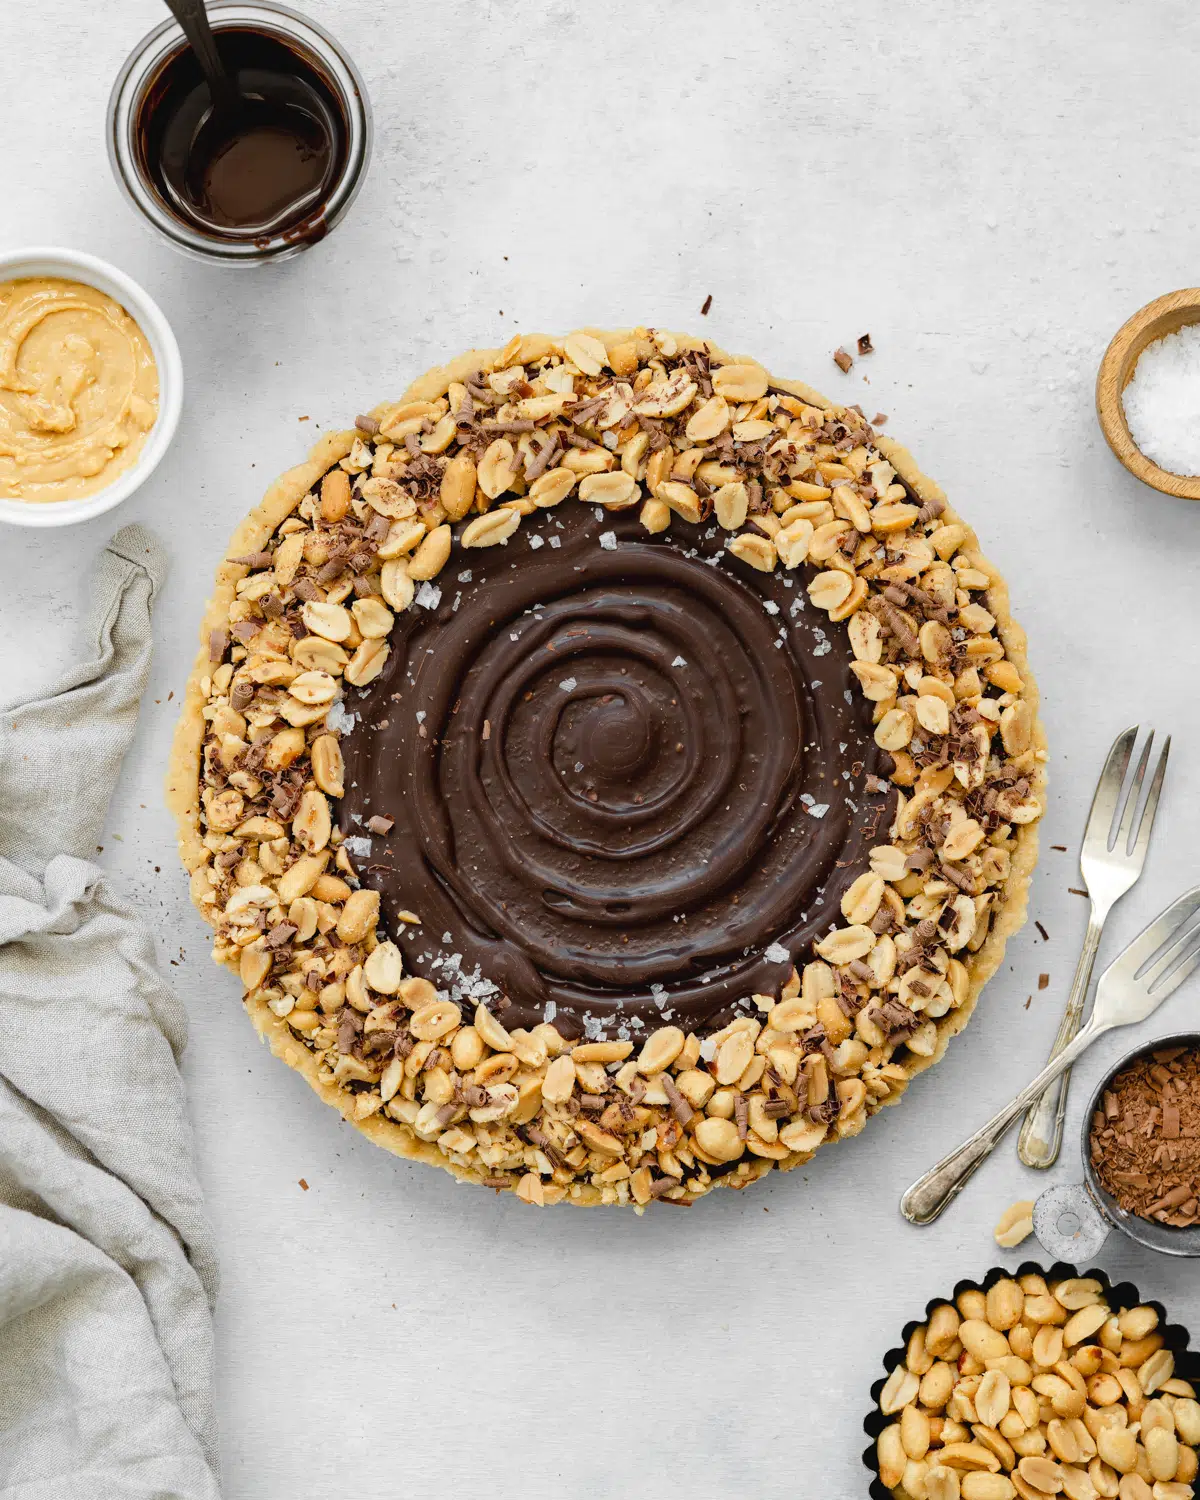 chocolate tart with roasted peanuts on a grey surface.